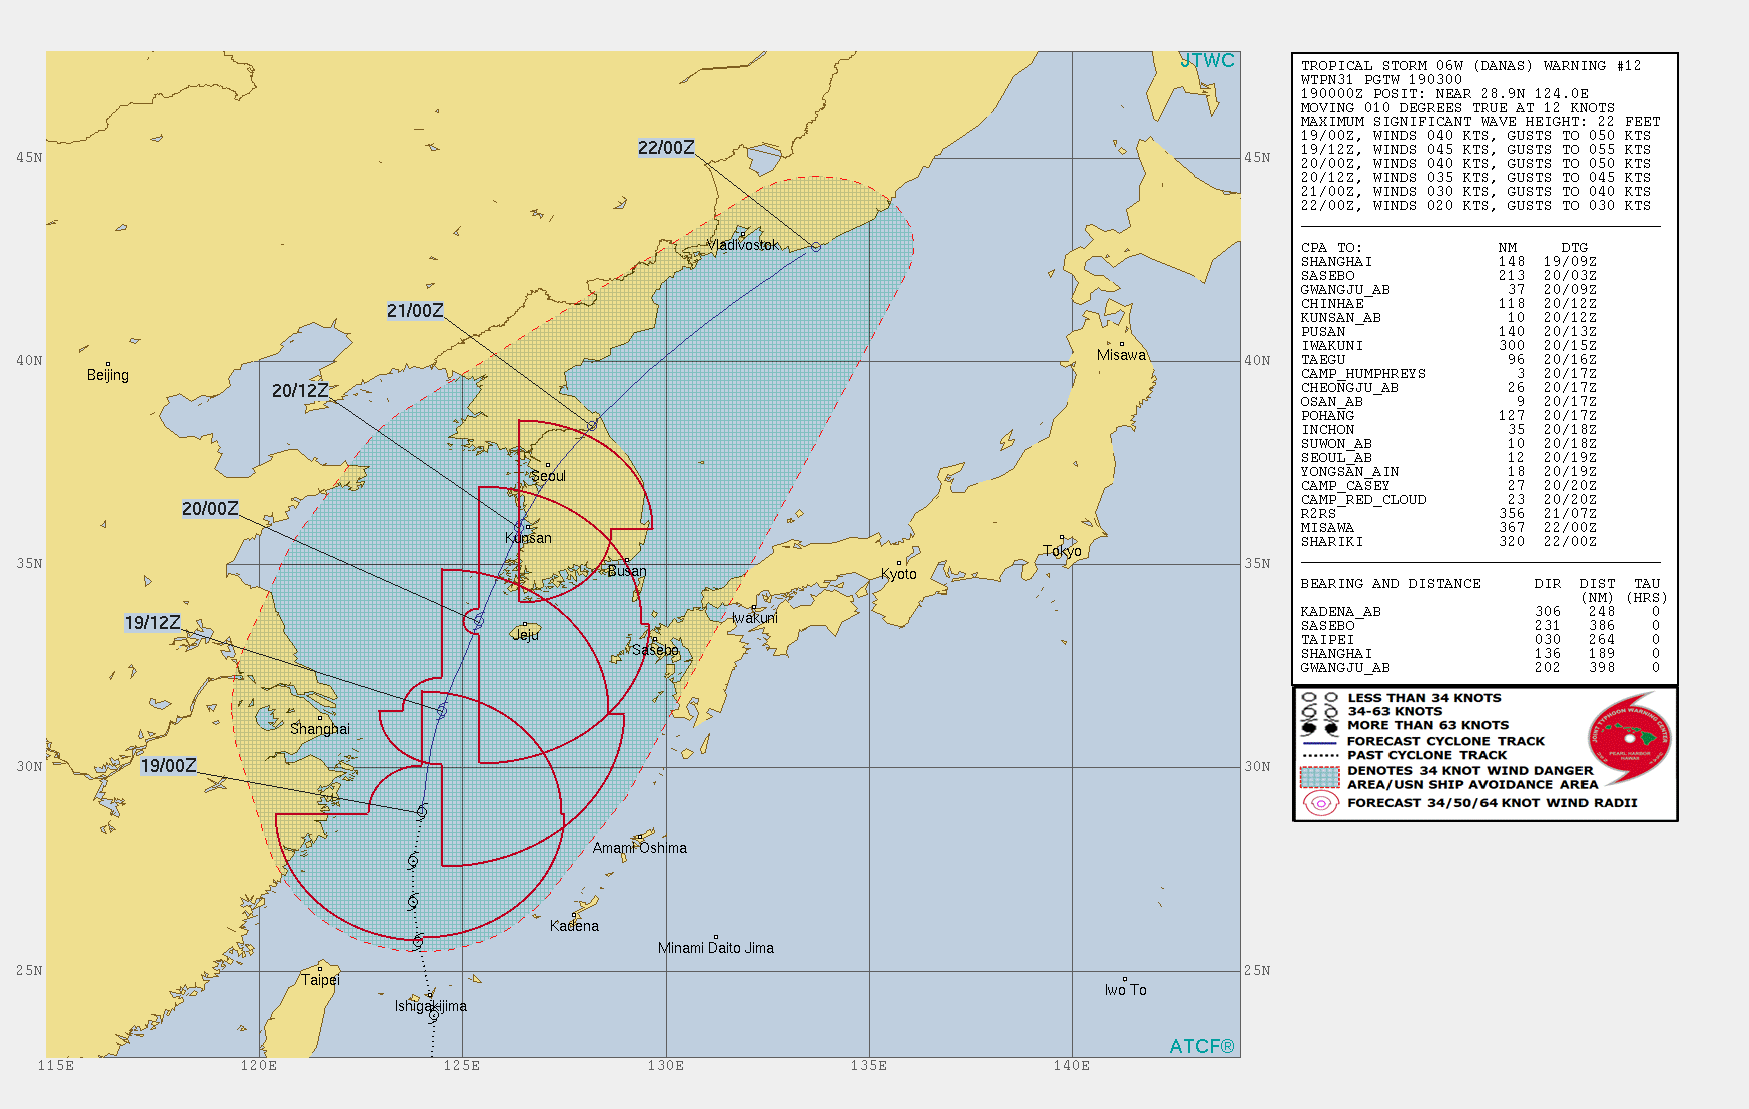 WARNING 12/JTWC. PEAK INTENSITY OF 45KNOTS FORECAST WITHIN 12HOURS. INTENSITY FORECAST TO FALL BELOW 35KNOTS IN 48HOURS.